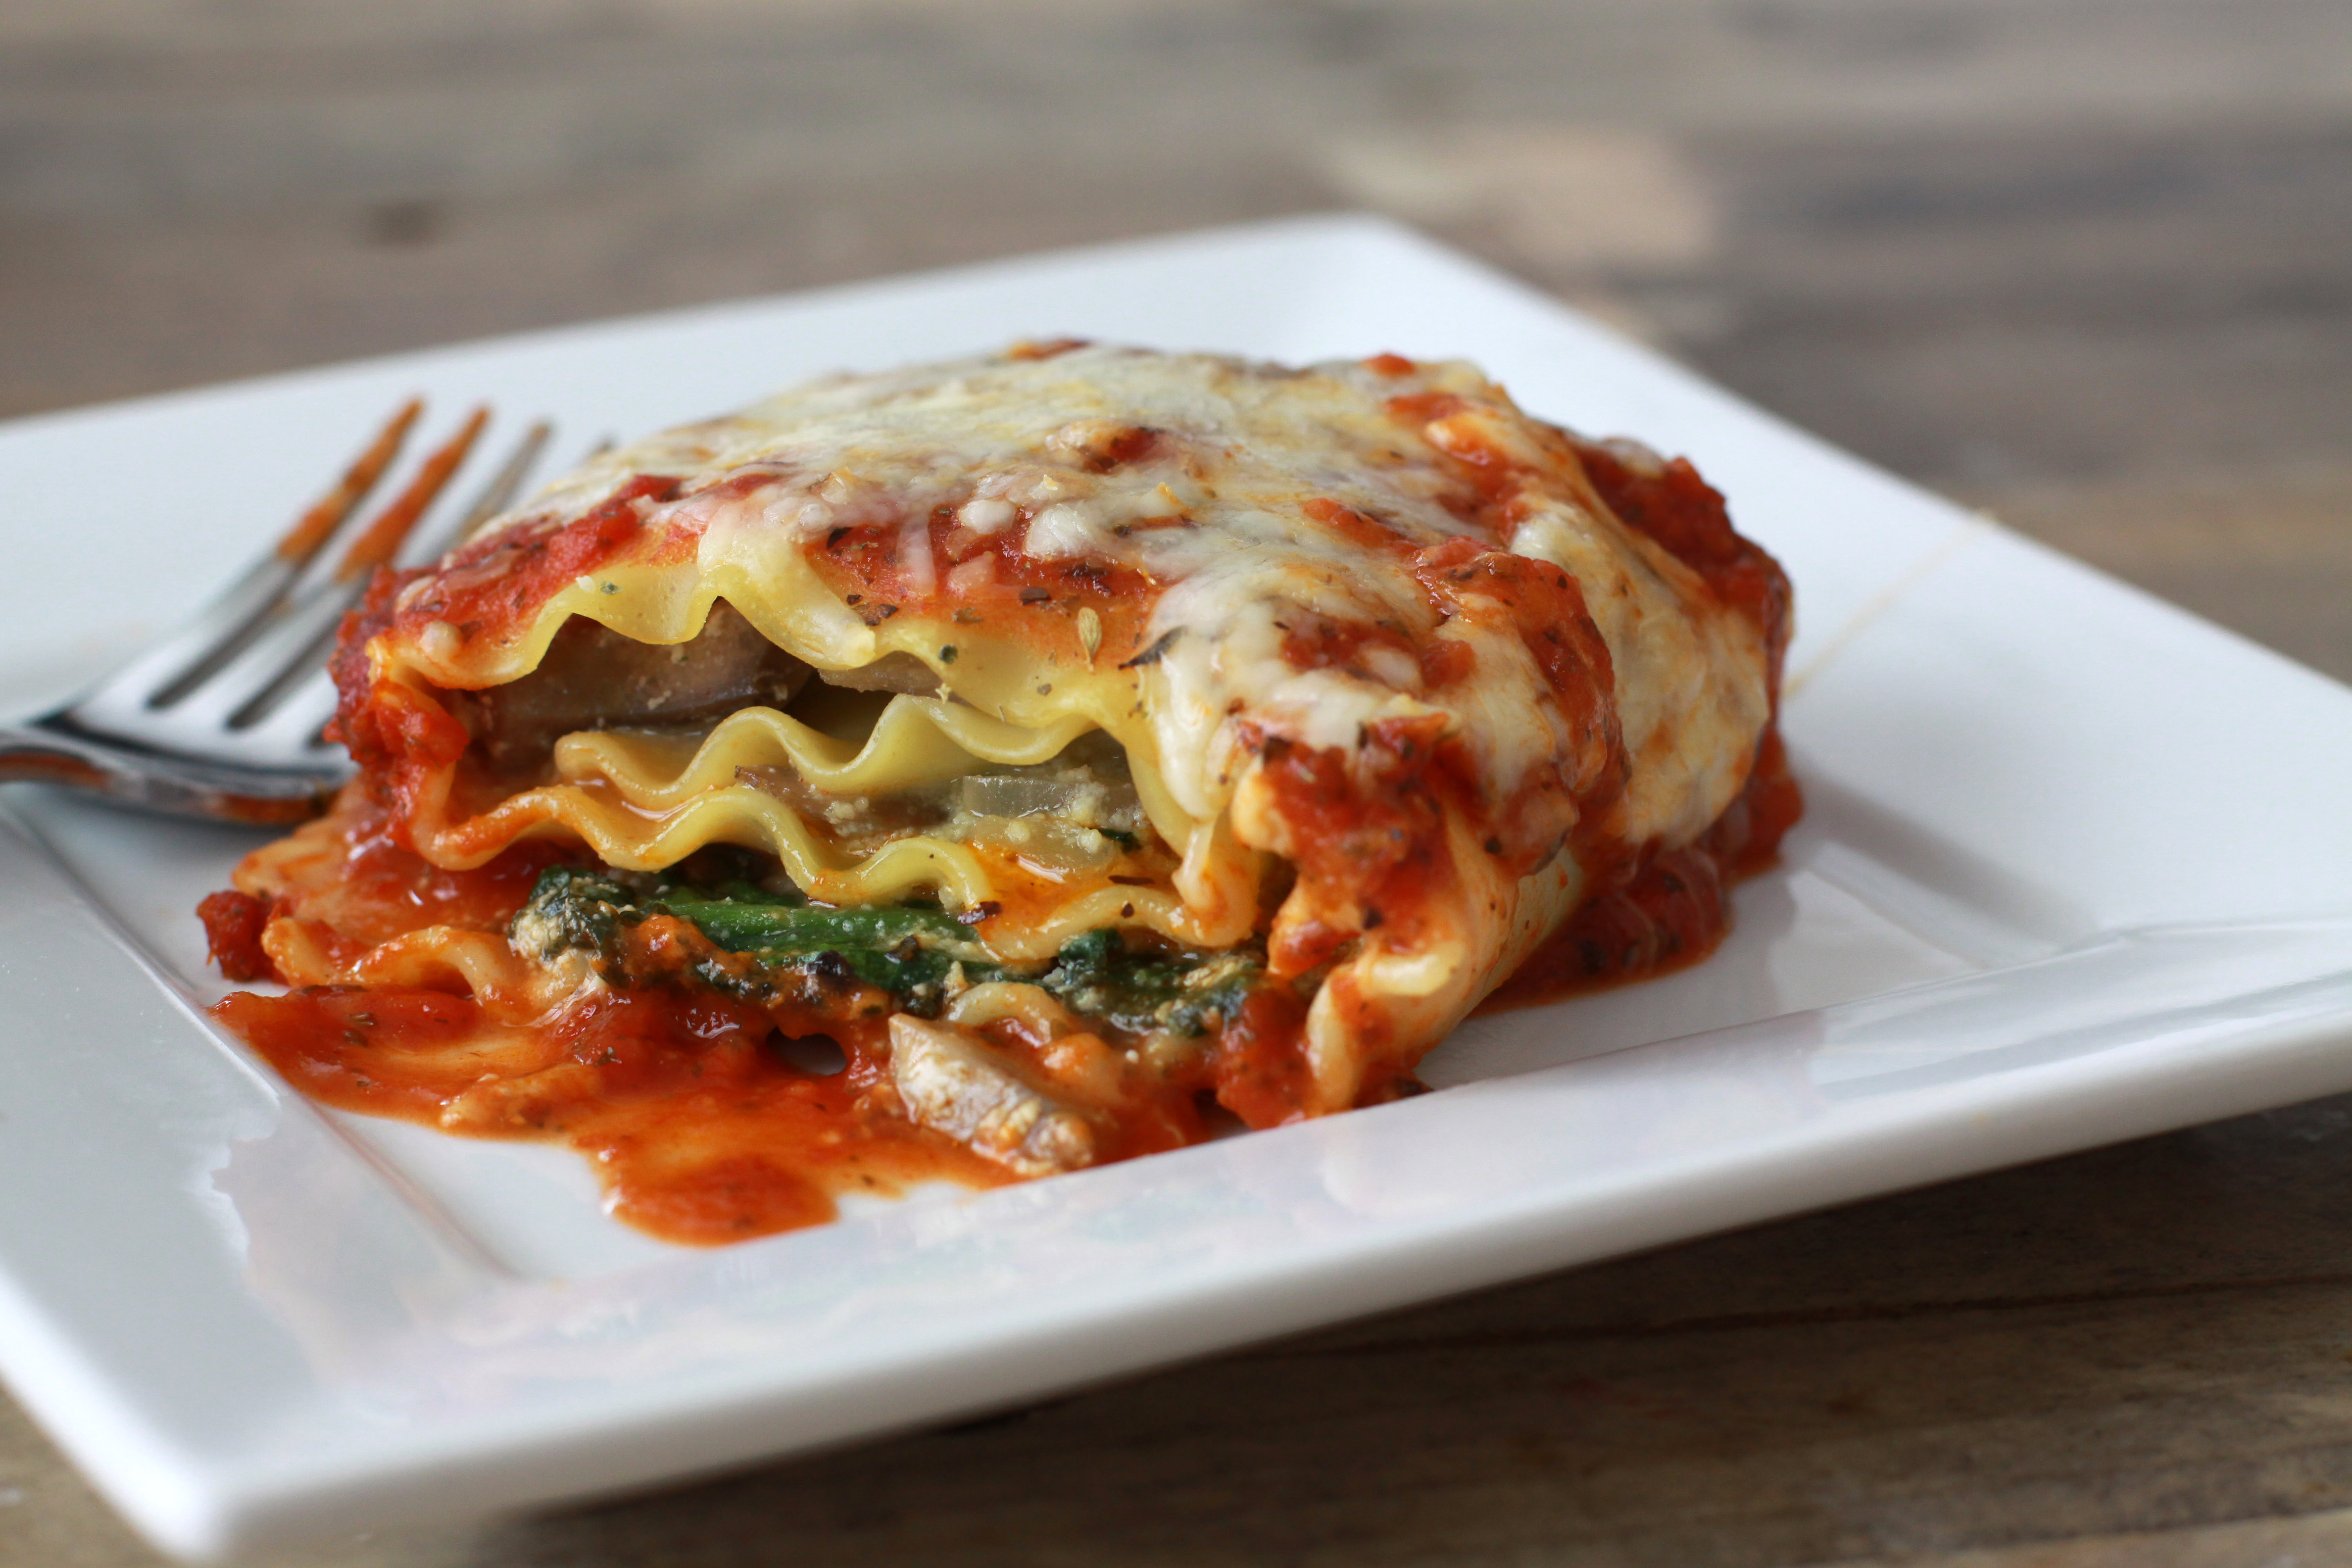 Rolled Spinach and Mushroom Lasagna.